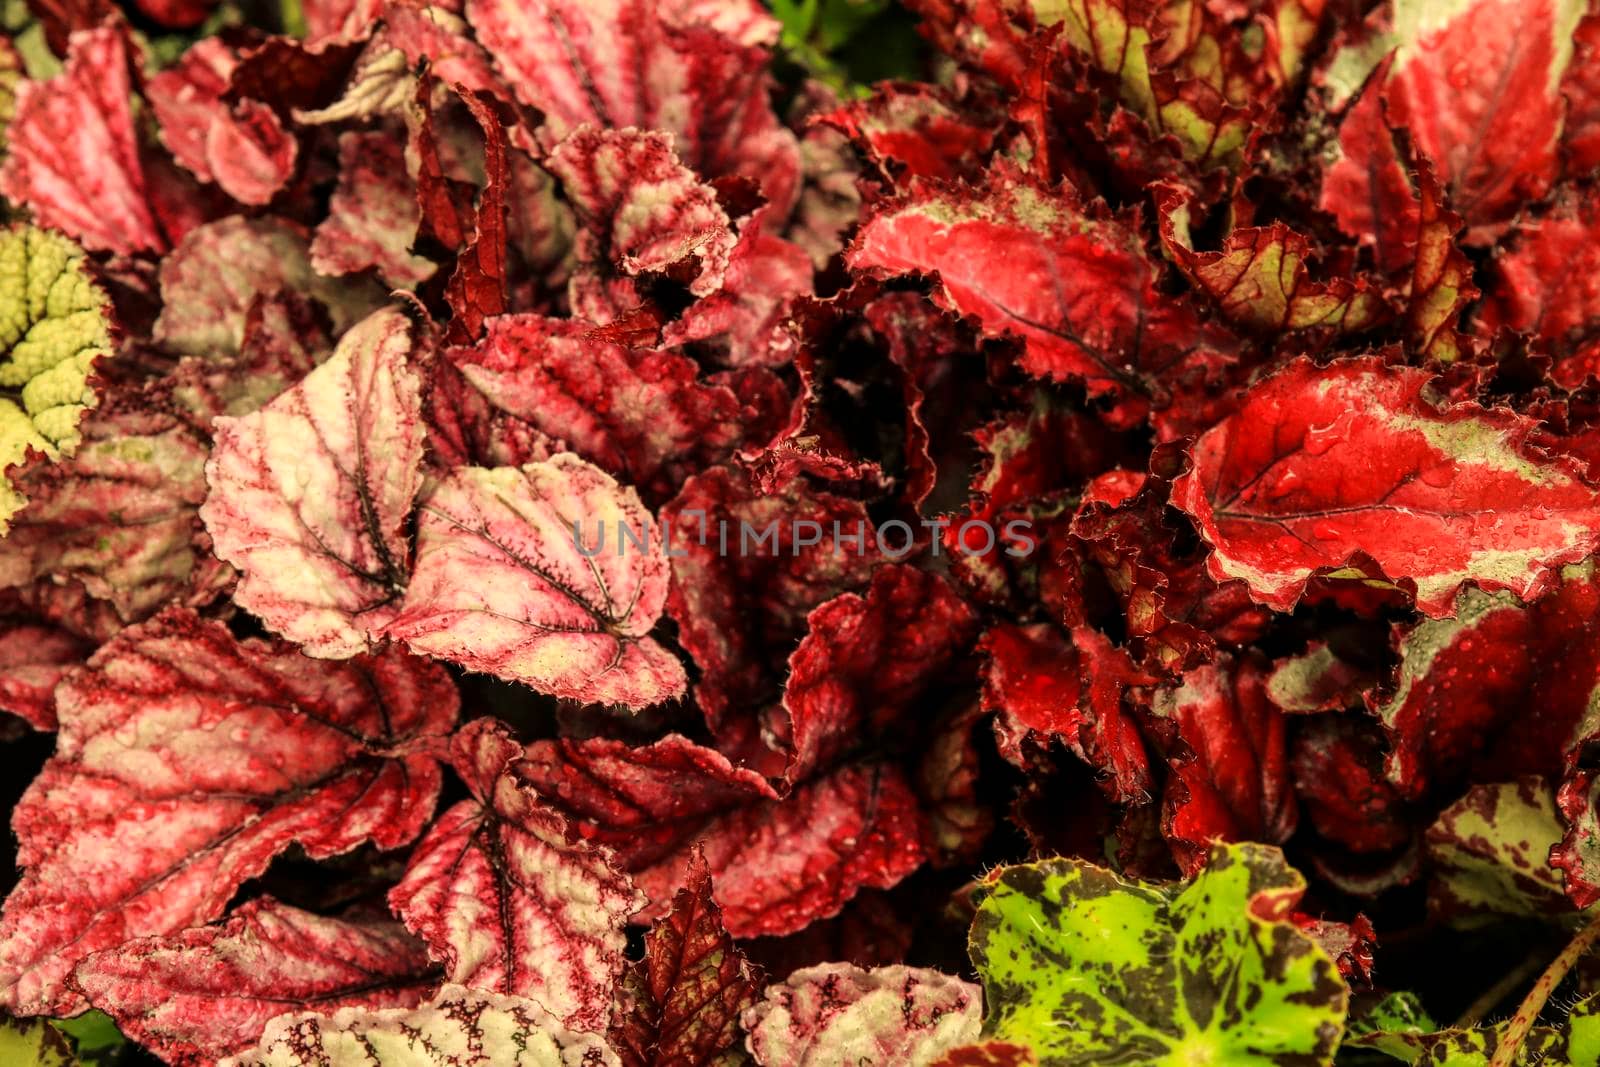 Colorful and beautiful Begonia plants in the garden